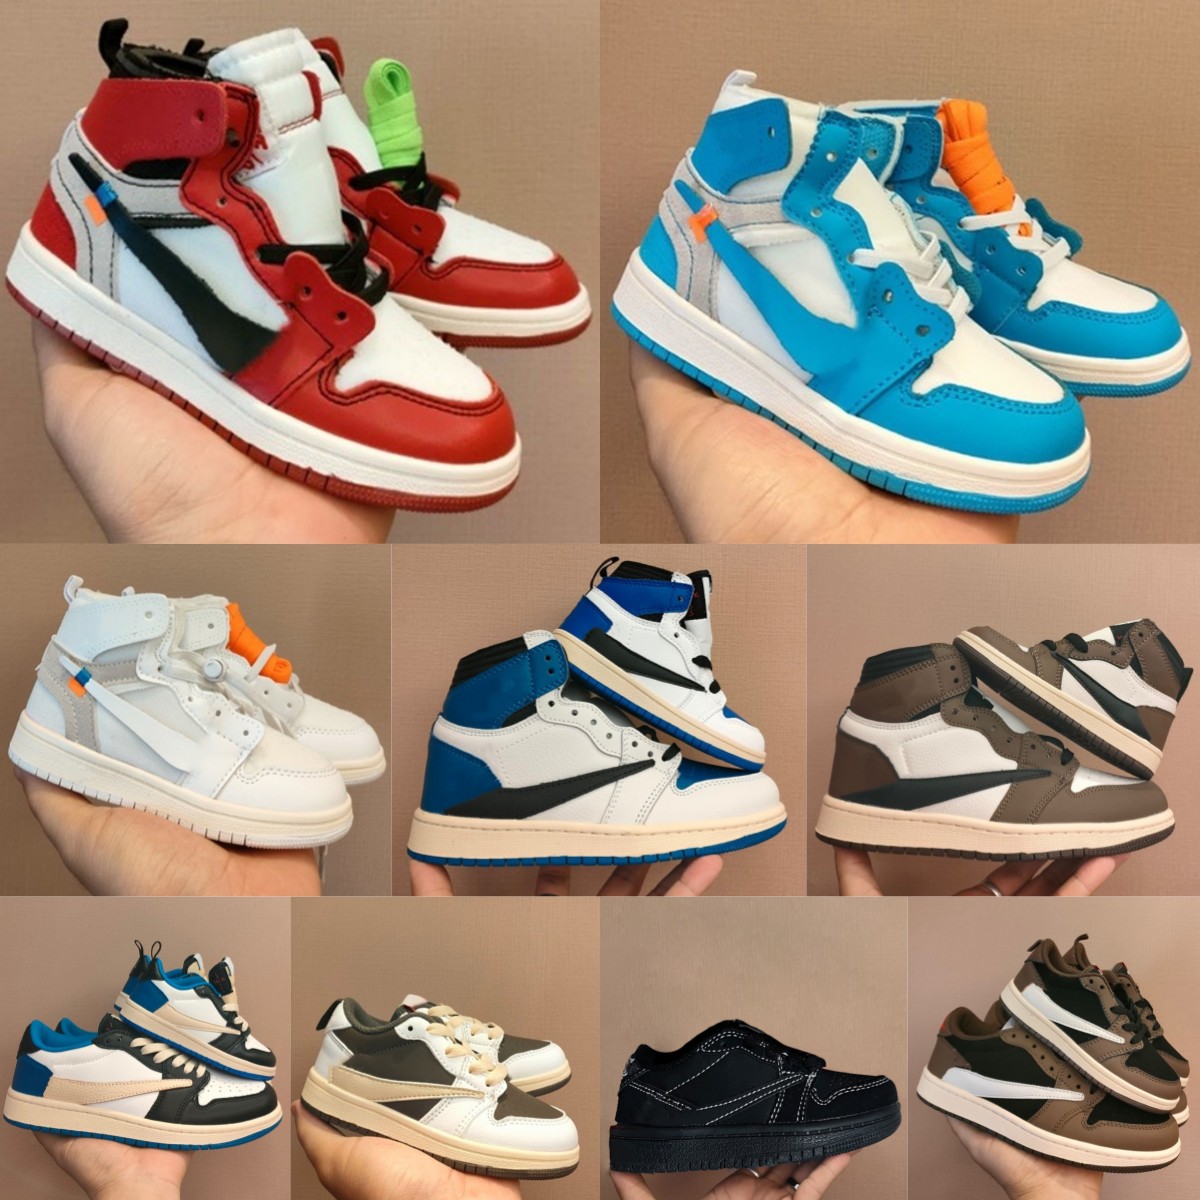 

kids shoes Reverse 1 Mocha 1s Basketball sneakers Blue High boys low Pour kid youth toddler Sport shoe Baby Children designer Outdoor Trainers UNC Chicago size 22-35